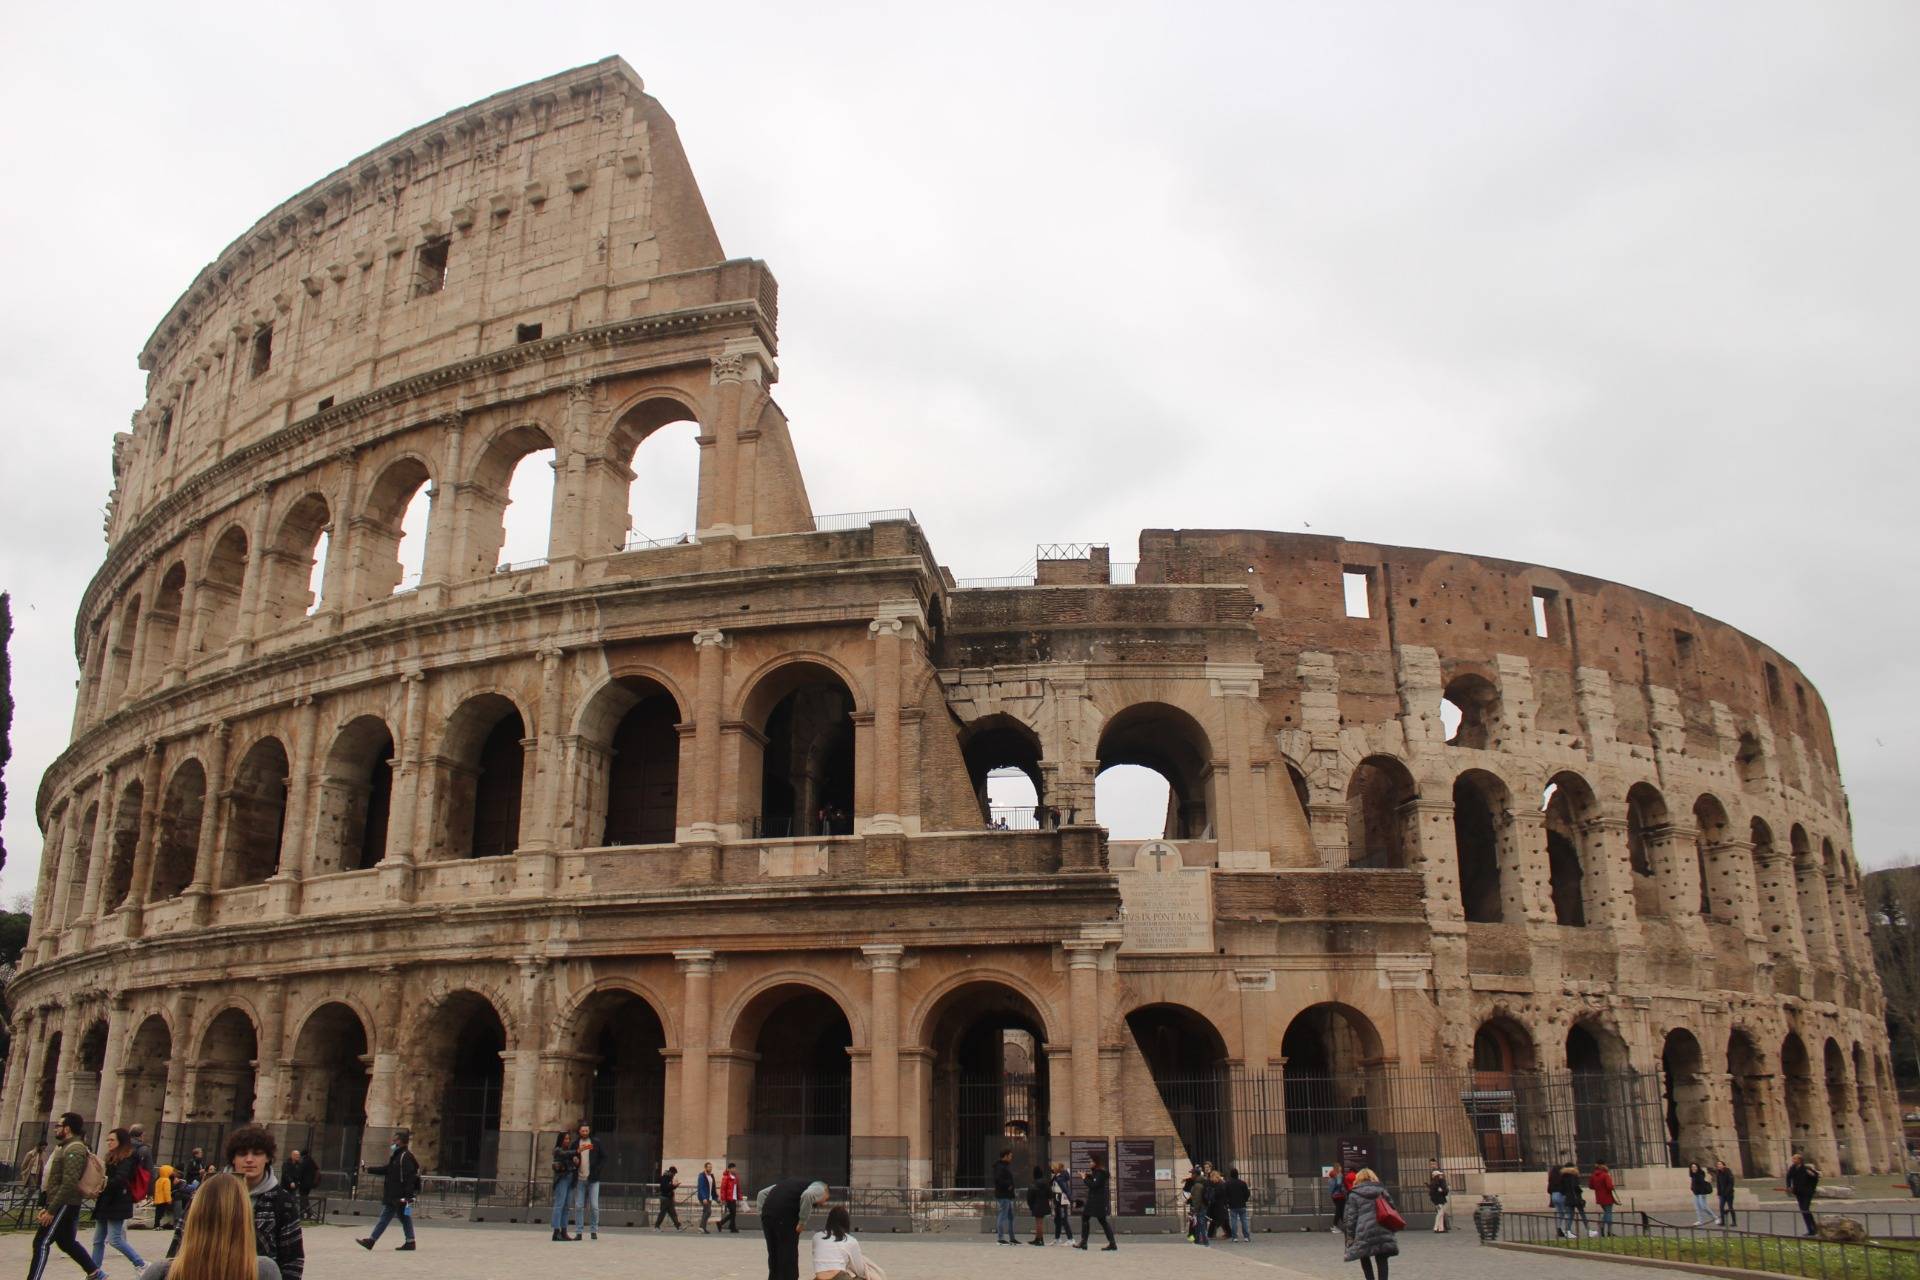 My long weekend in Rome no.12 - Colosseum

